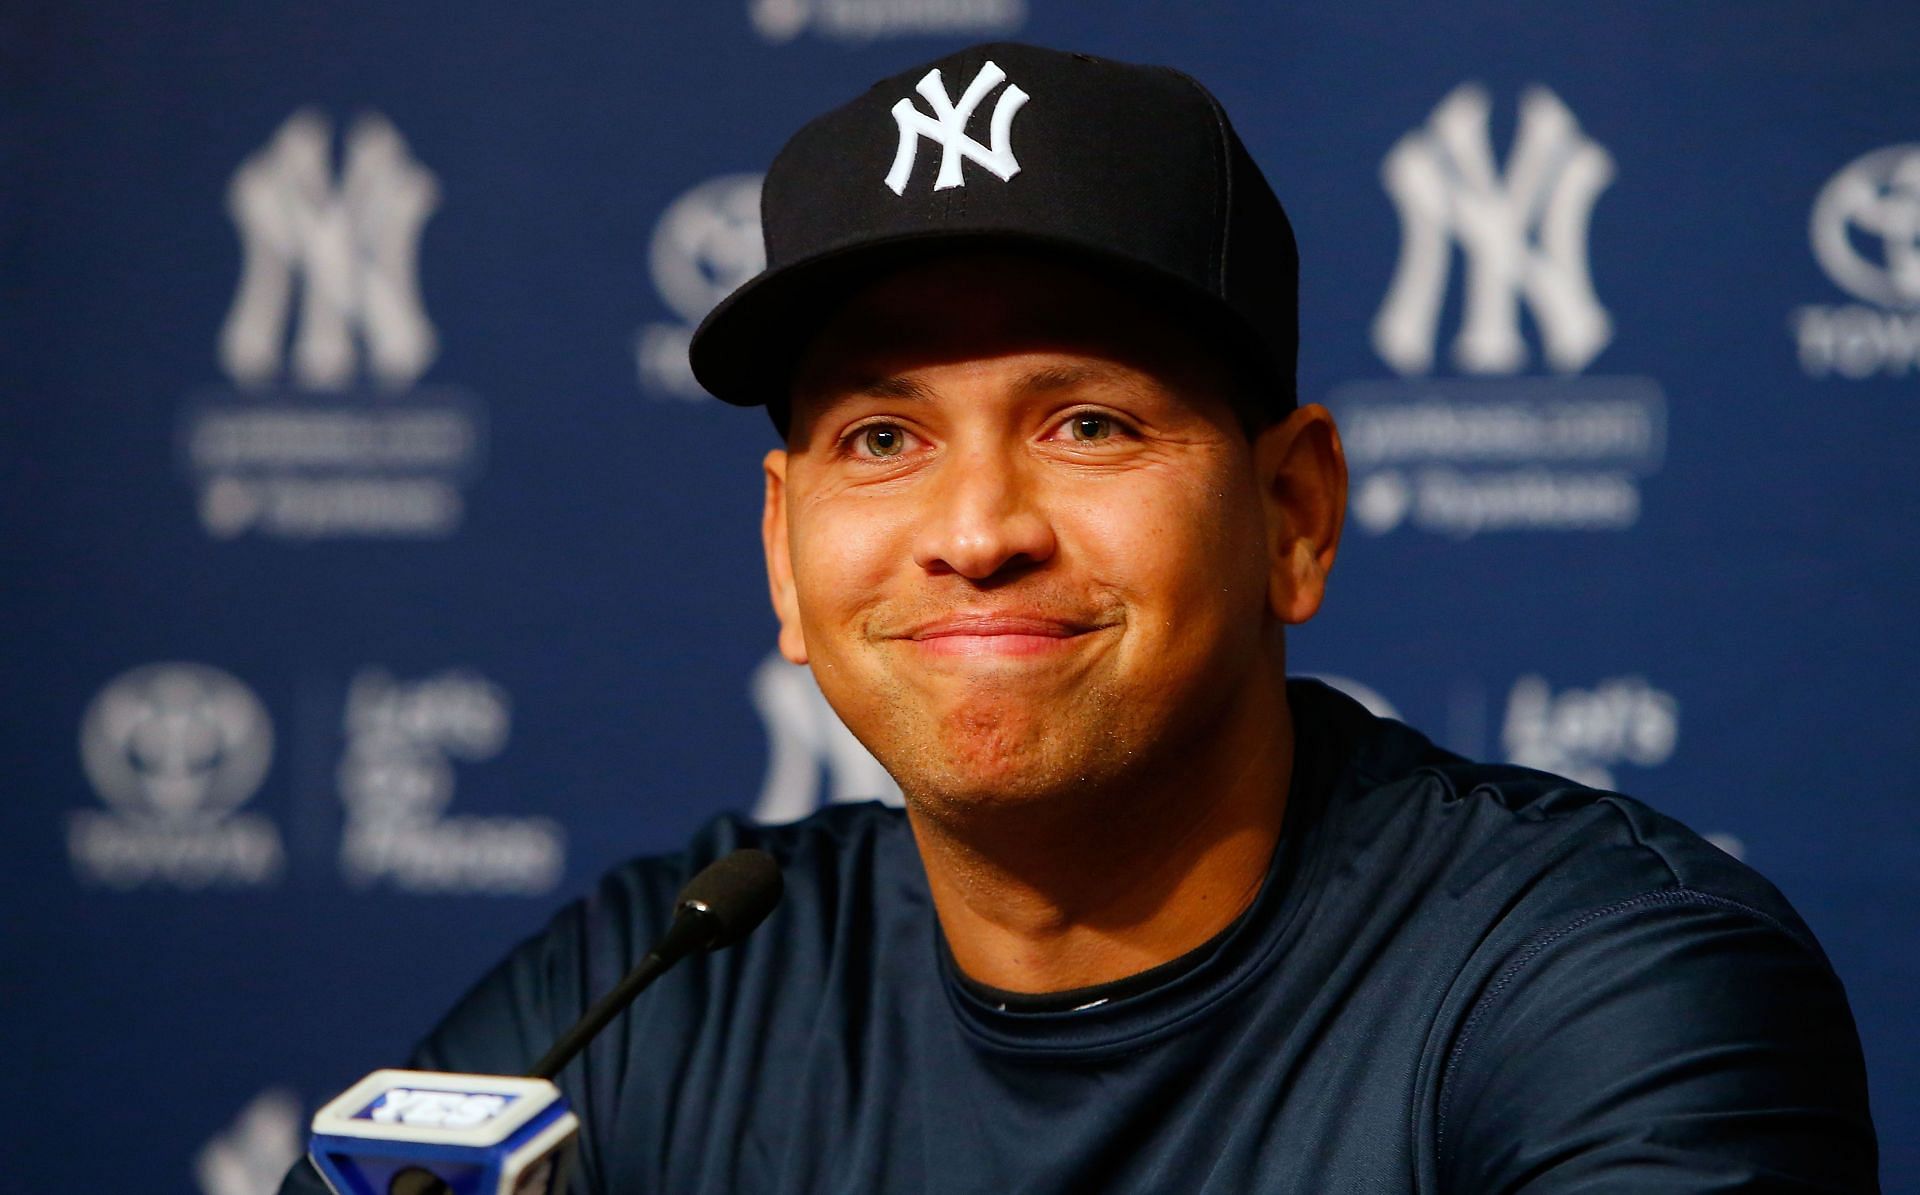 Alex Rodriguez may be left out of the Hall of Fame